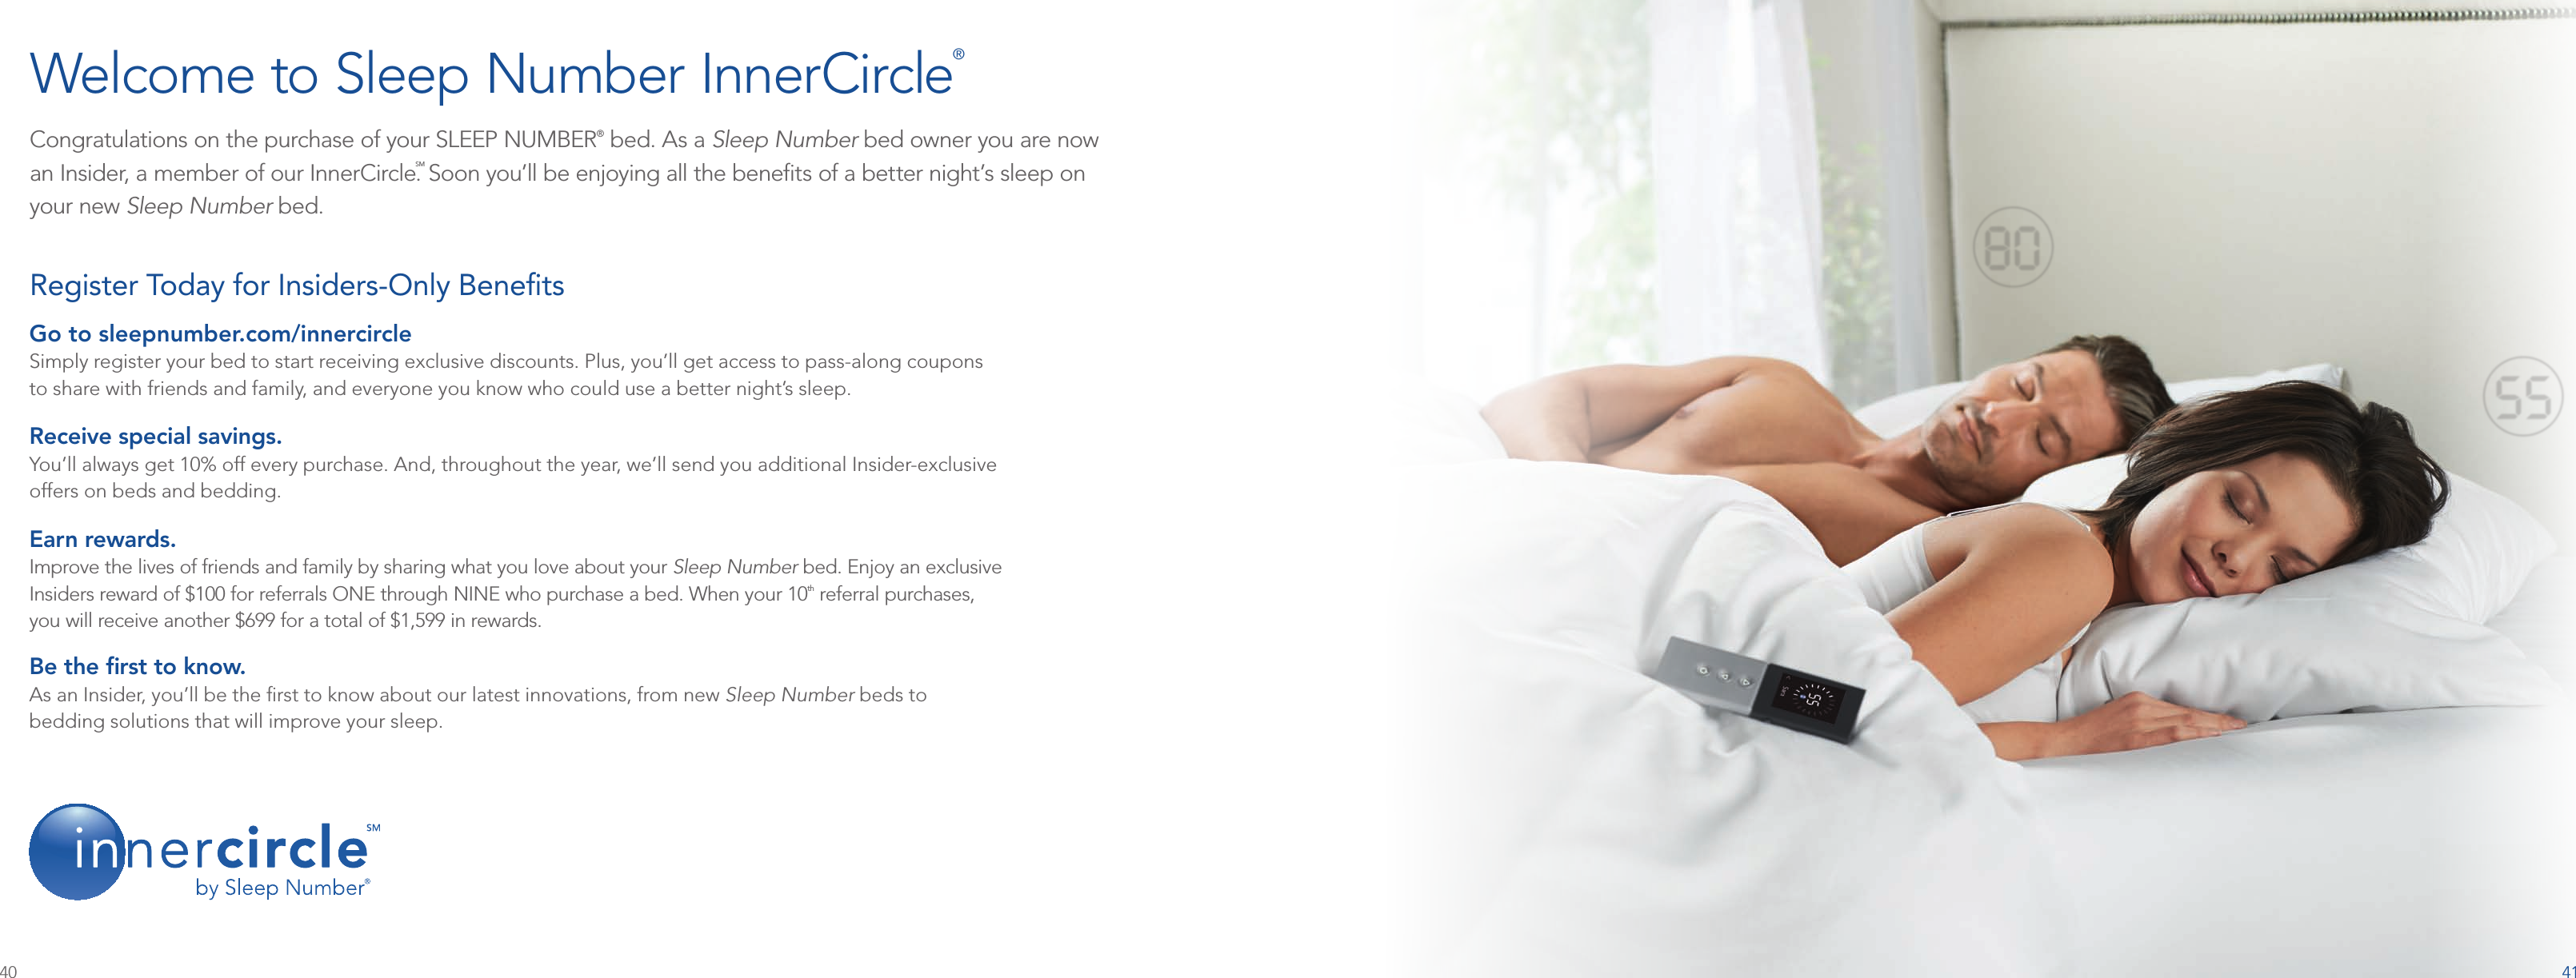 41Congratulations on the purchase of your SLEEP NUMBER® bed. As a Sleep Number bed owner you are now  an Insider, a member of our InnerCircle.SM Soon you’ll be enjoying all the beneﬁts of a better night’s sleep on  your new Sleep Number bed. Welcome to Sleep Number InnerCircle®Go to sleepnumber.com/innercircleSimply register your bed to start receiving exclusive discounts. Plus, you’ll get access to pass-along coupons  to share with friends and family, and everyone you know who could use a better night’s sleep.Receive special savings. You’ll always get 10% off every purchase. And, throughout the year, we’ll send you additional Insider-exclusive  offers on beds and bedding.Earn rewards. Improve the lives of friends and family by sharing what you love about your Sleep Number bed. Enjoy an exclusive  Insiders reward of $100 for referrals ONE through NINE who purchase a bed. When your 10th referral purchases,  you will receive another $699 for a total of $1,599 in rewards.Be the ﬁrst to know. As an Insider, you’ll be the ﬁrst to know about our latest innovations, from new Sleep Number beds to  bedding solutions that will improve your sleep.Register Today for Insiders-Only Beneﬁts 40